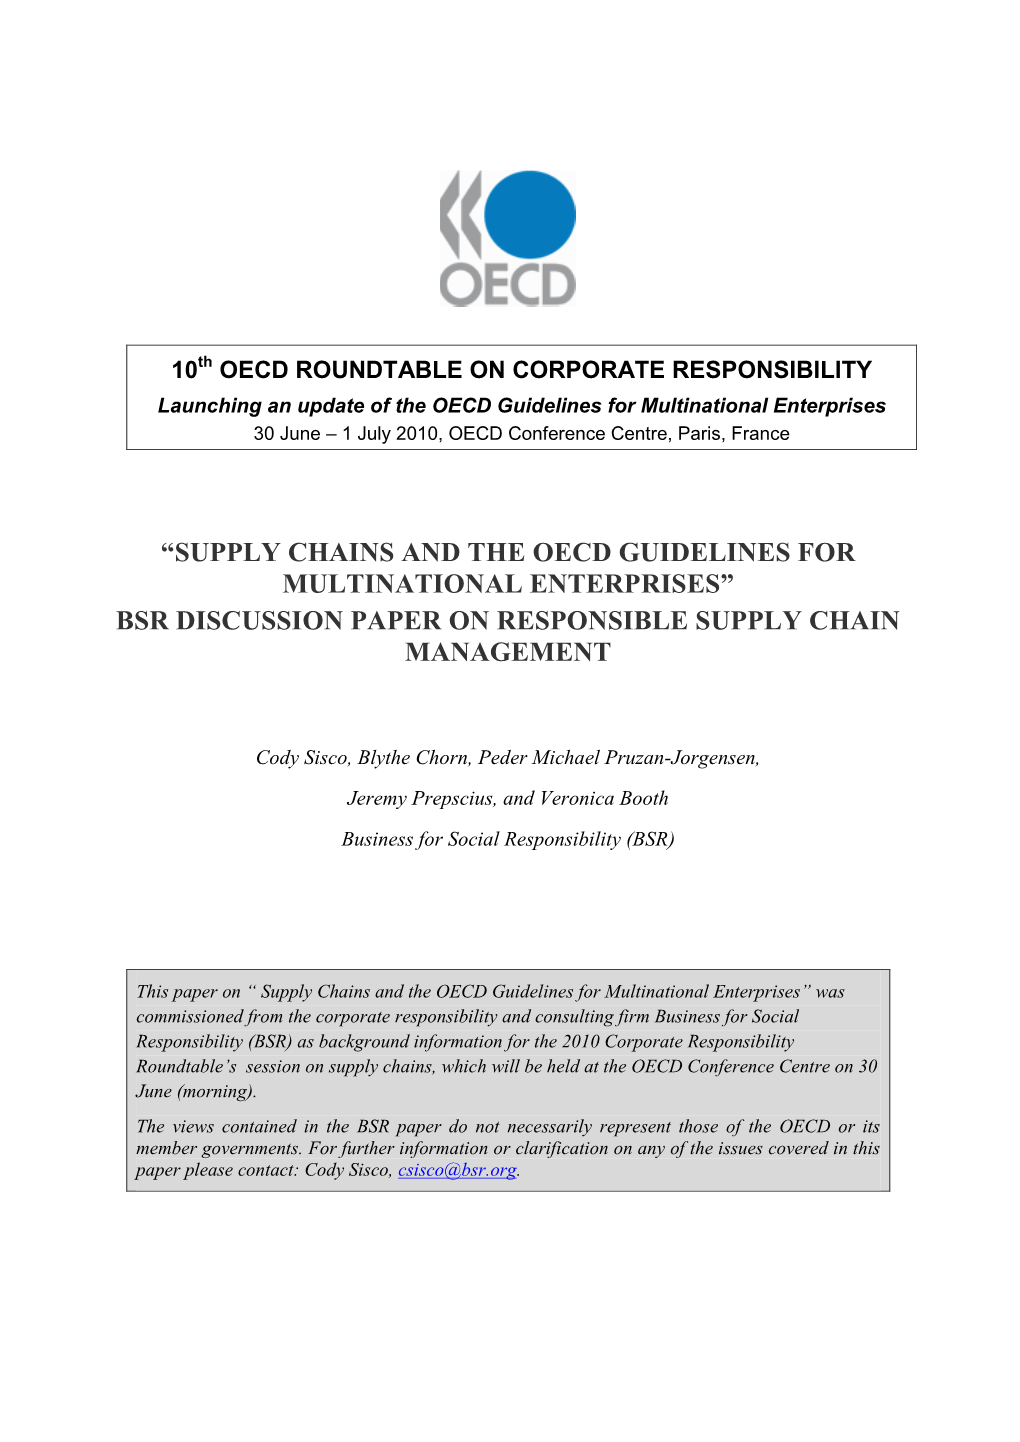 Bsr Discussion Paper on Responsible Supply Chain Management